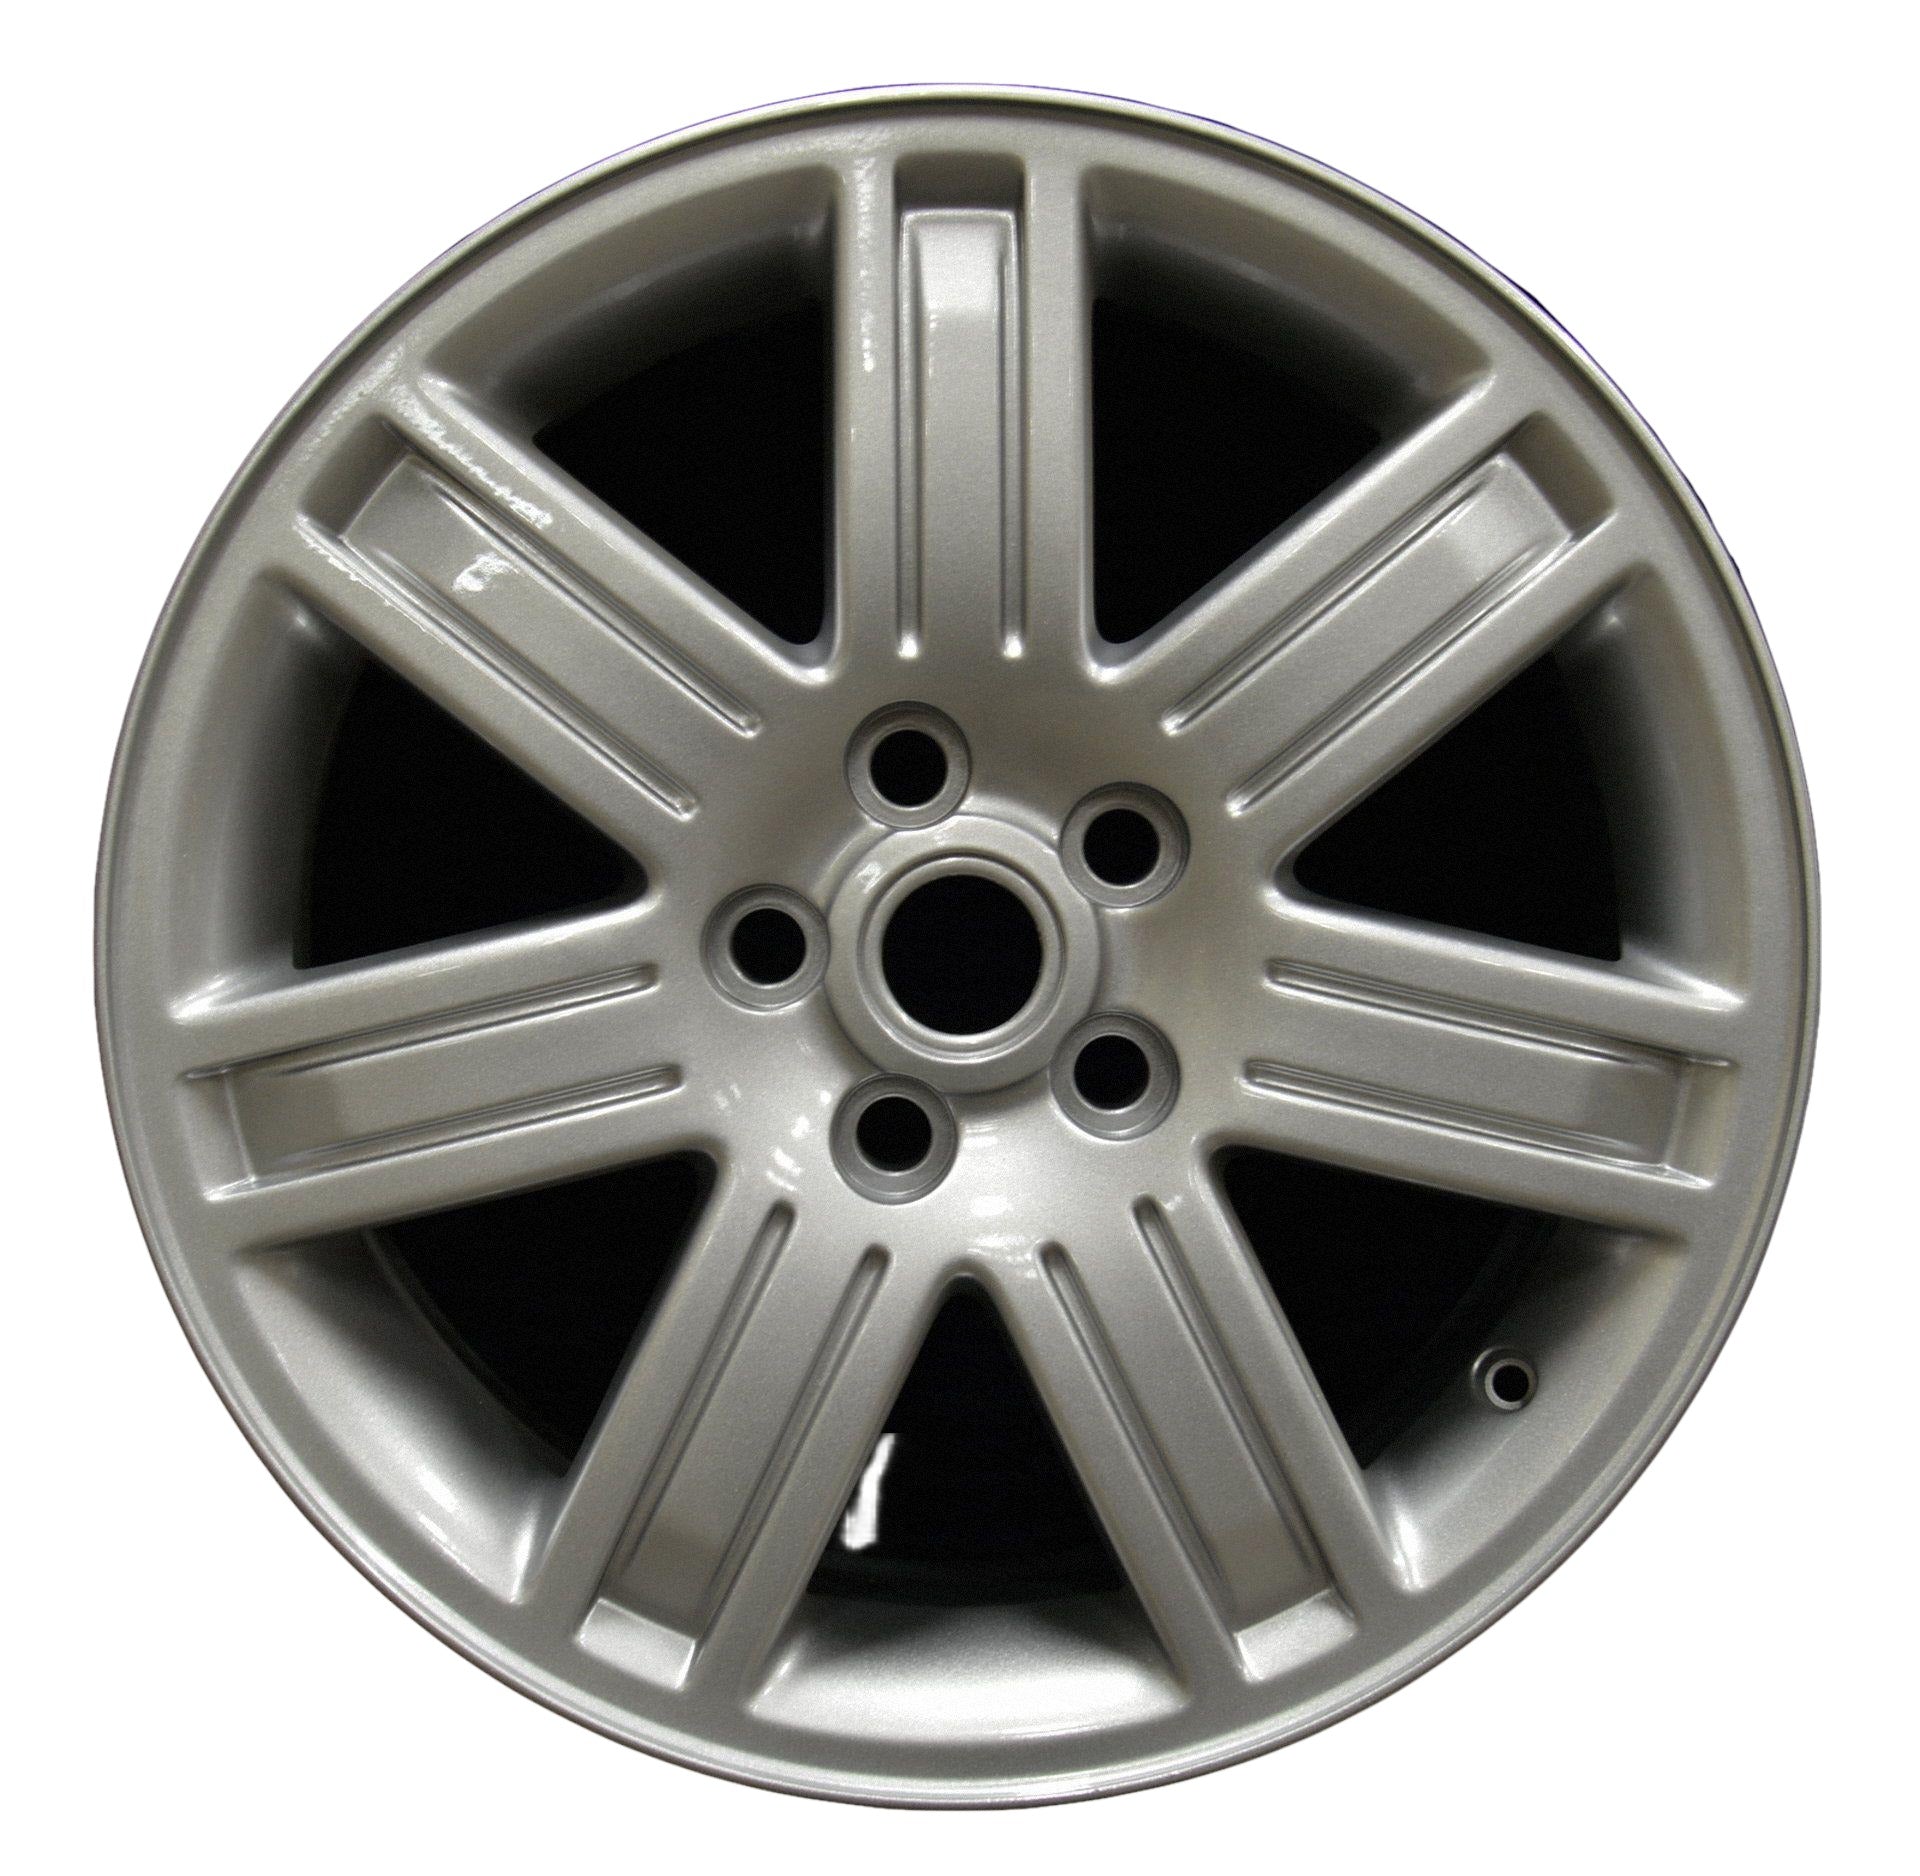 Land Rover Range Rover Sport  2006 Factory OEM Car Wheel Size 19x8 Alloy WAO.72198.PS14.FF